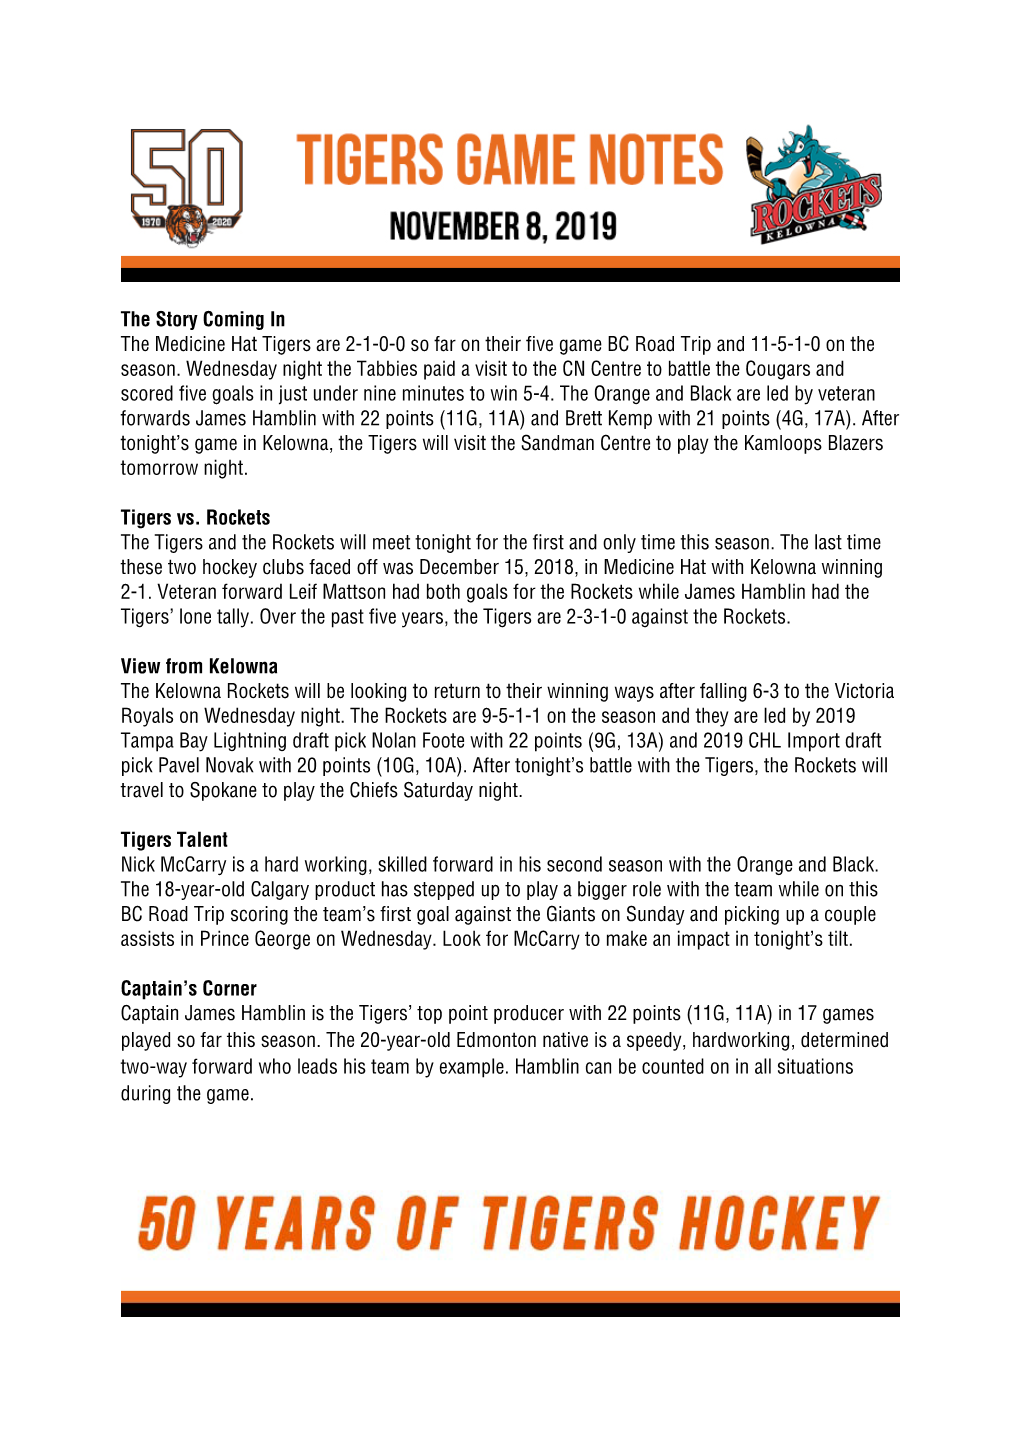 The Story Coming in the Medicine Hat Tigers Are 2-1-0-0 So Far on Their Five Game BC Road Trip and 11-5-1-0 on the Season